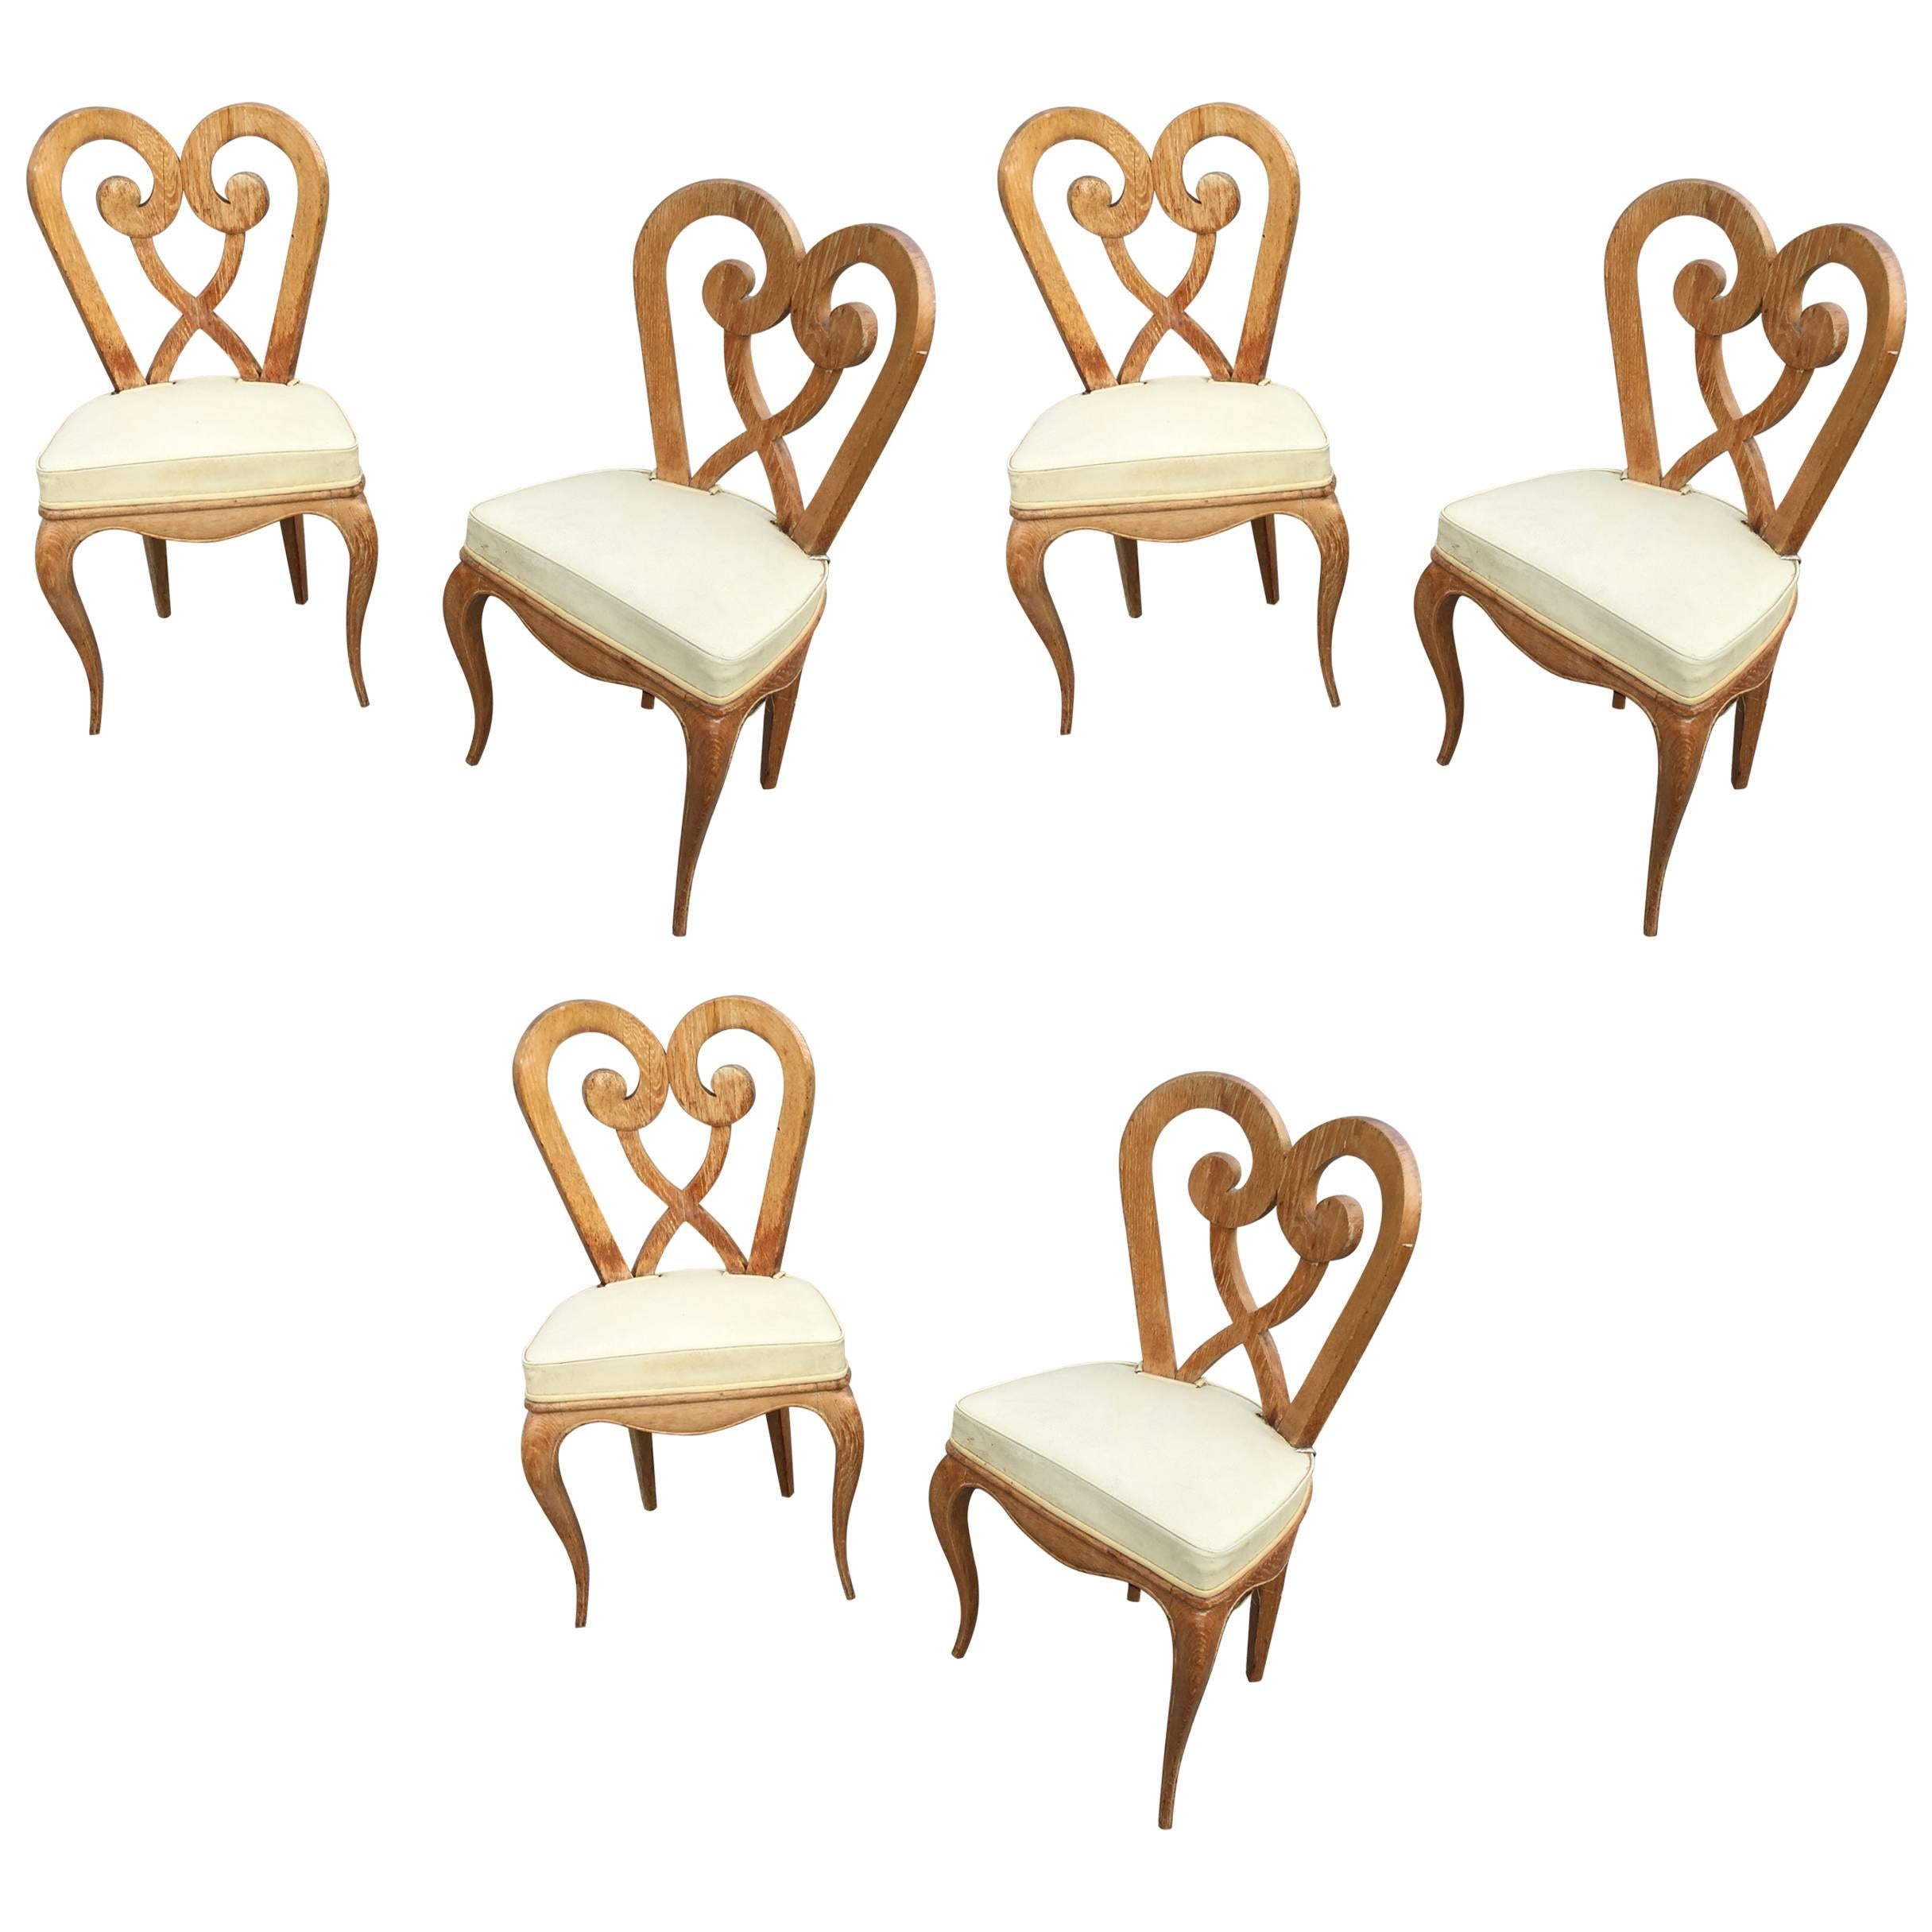 Germaine Darbois-Gaudin, Set of Six Art Deco Chairs, circa 1940 For Sale